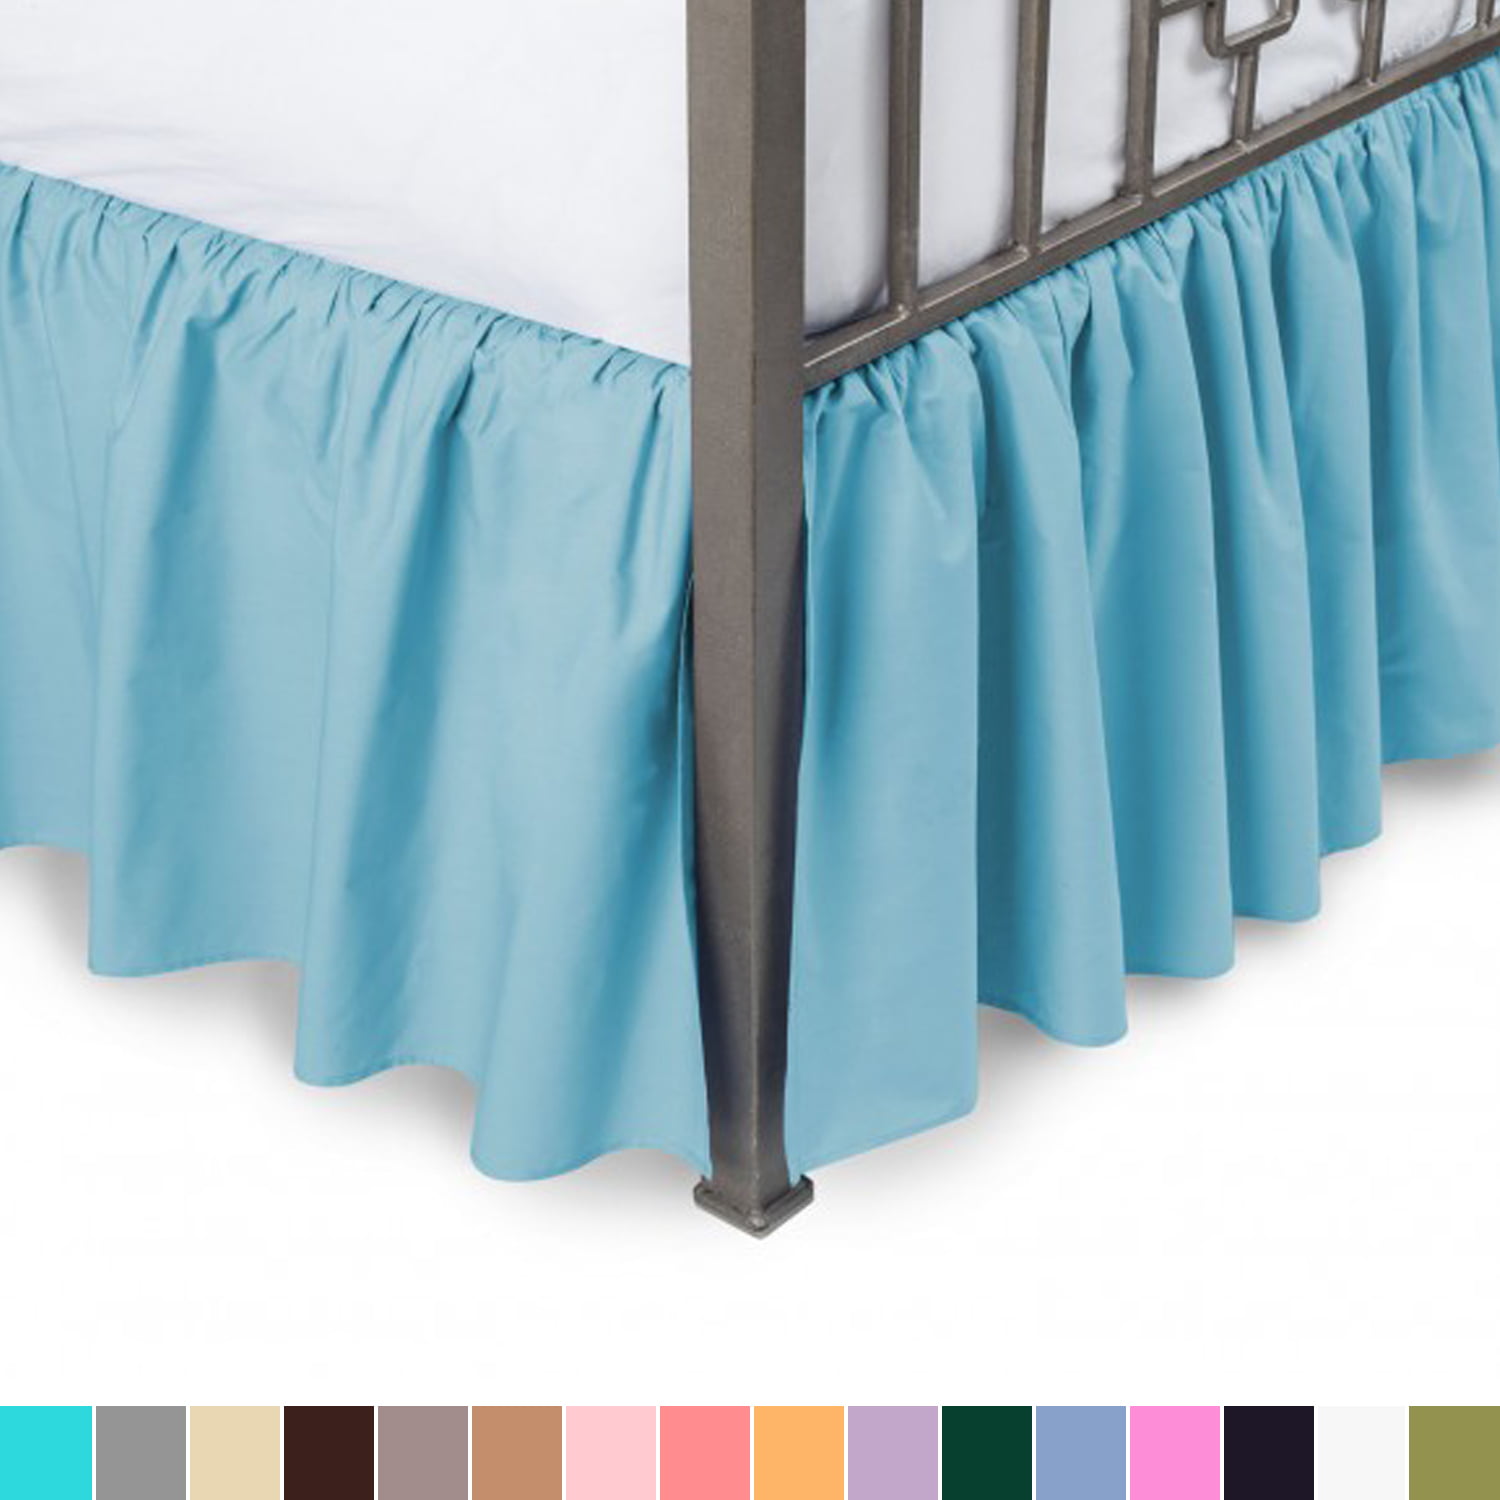 Ruffled Bed Skirt With Split Corners, King Size Bed Skirts 16 Inch Drop